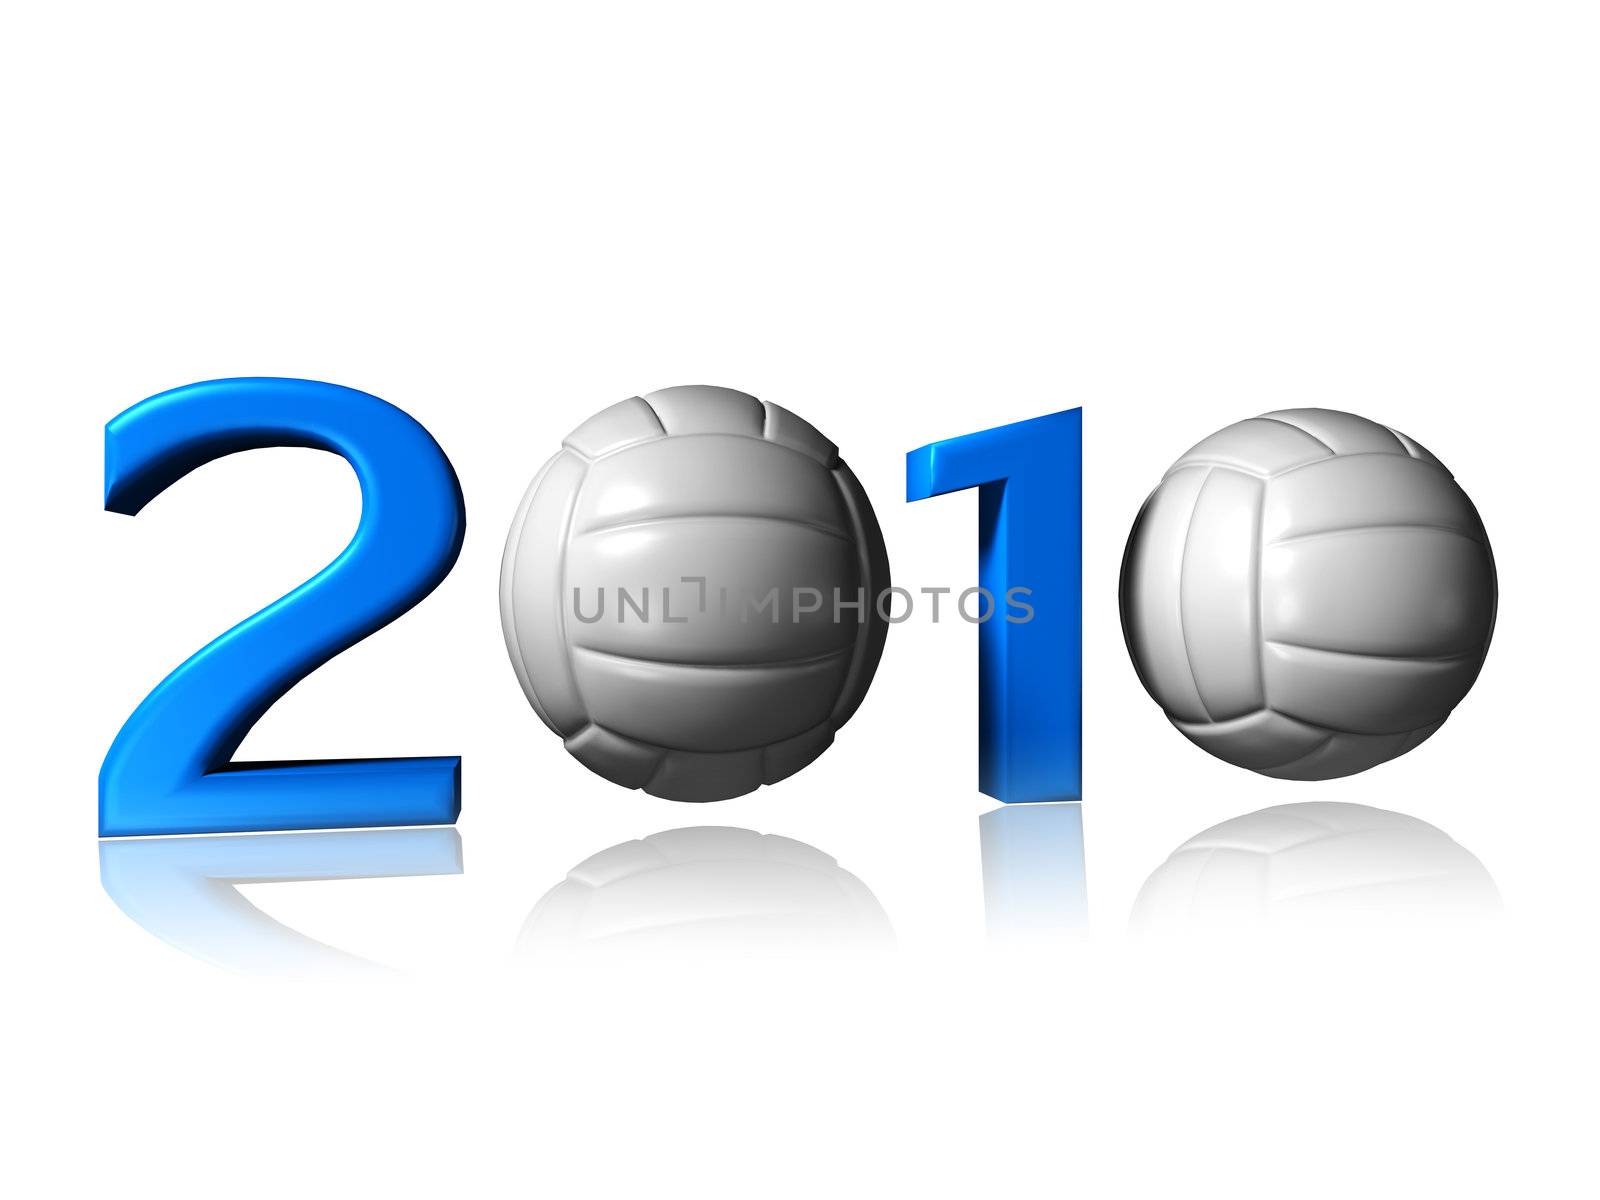 It's a big 2010 volley logo on a white background